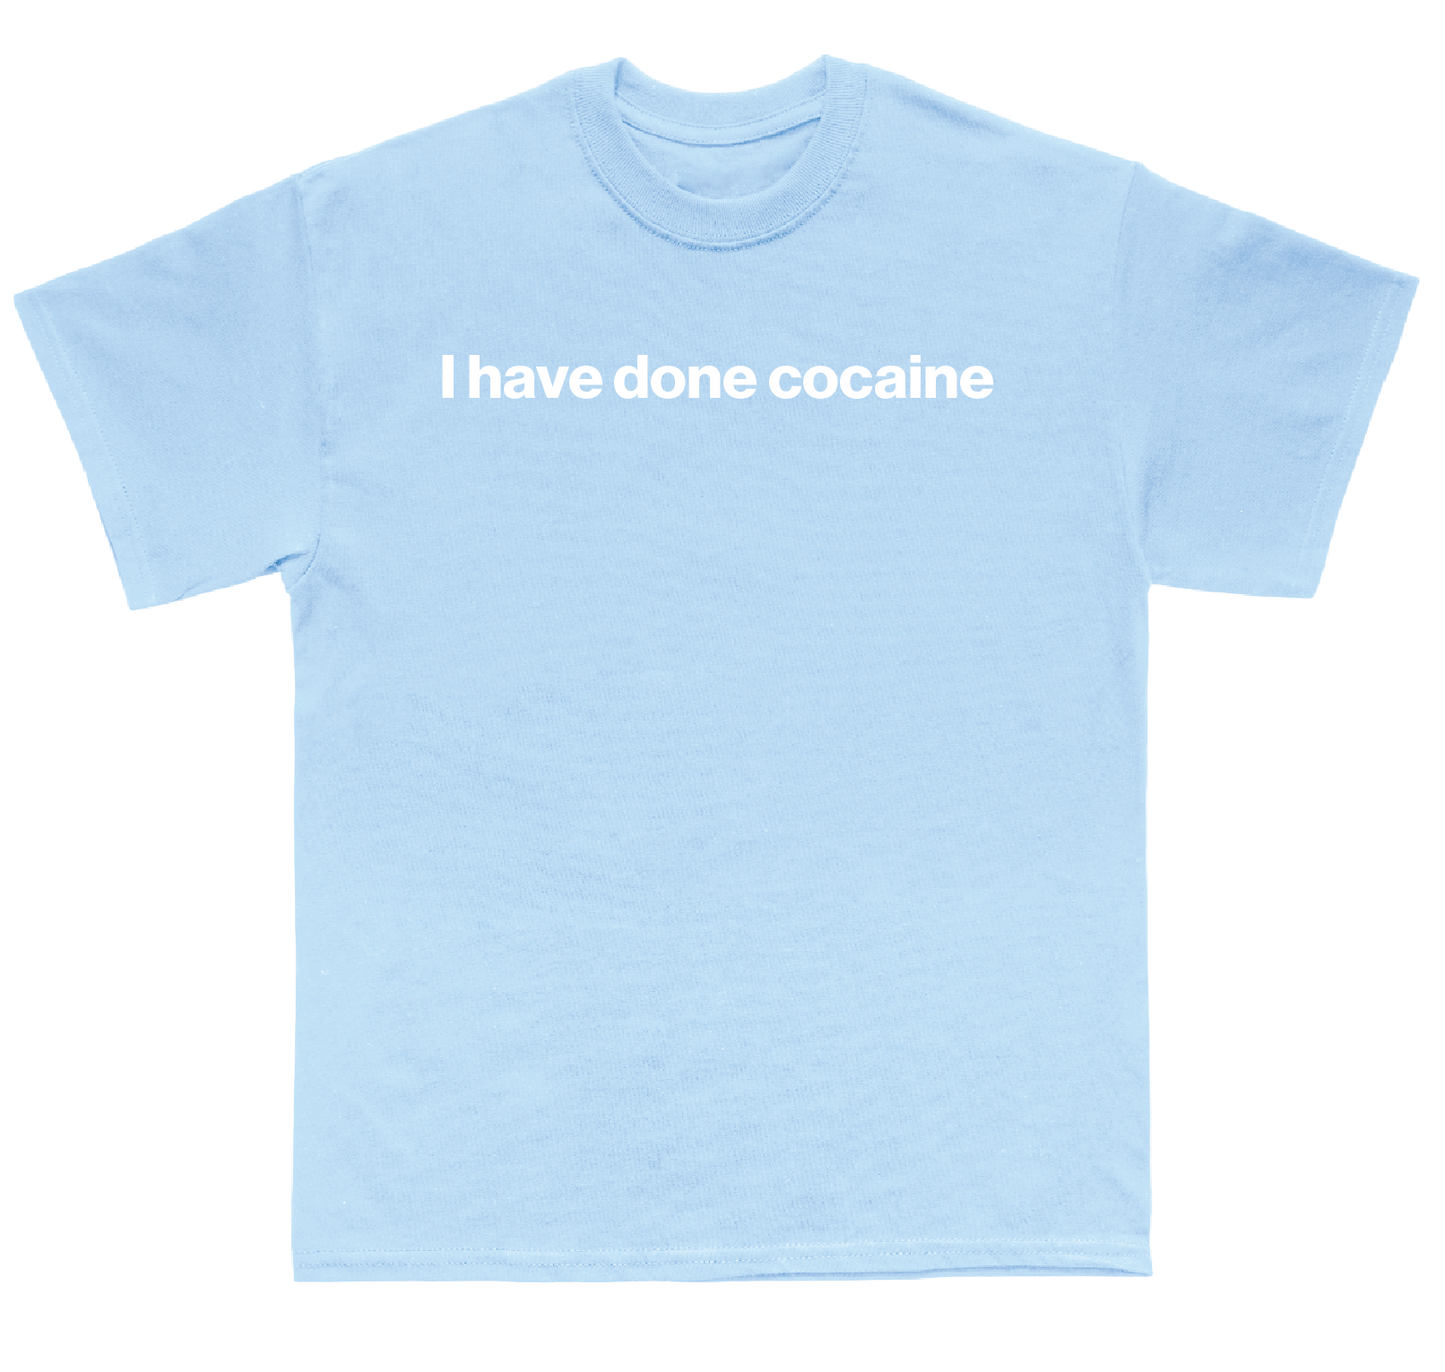 I have done cocaine shirt